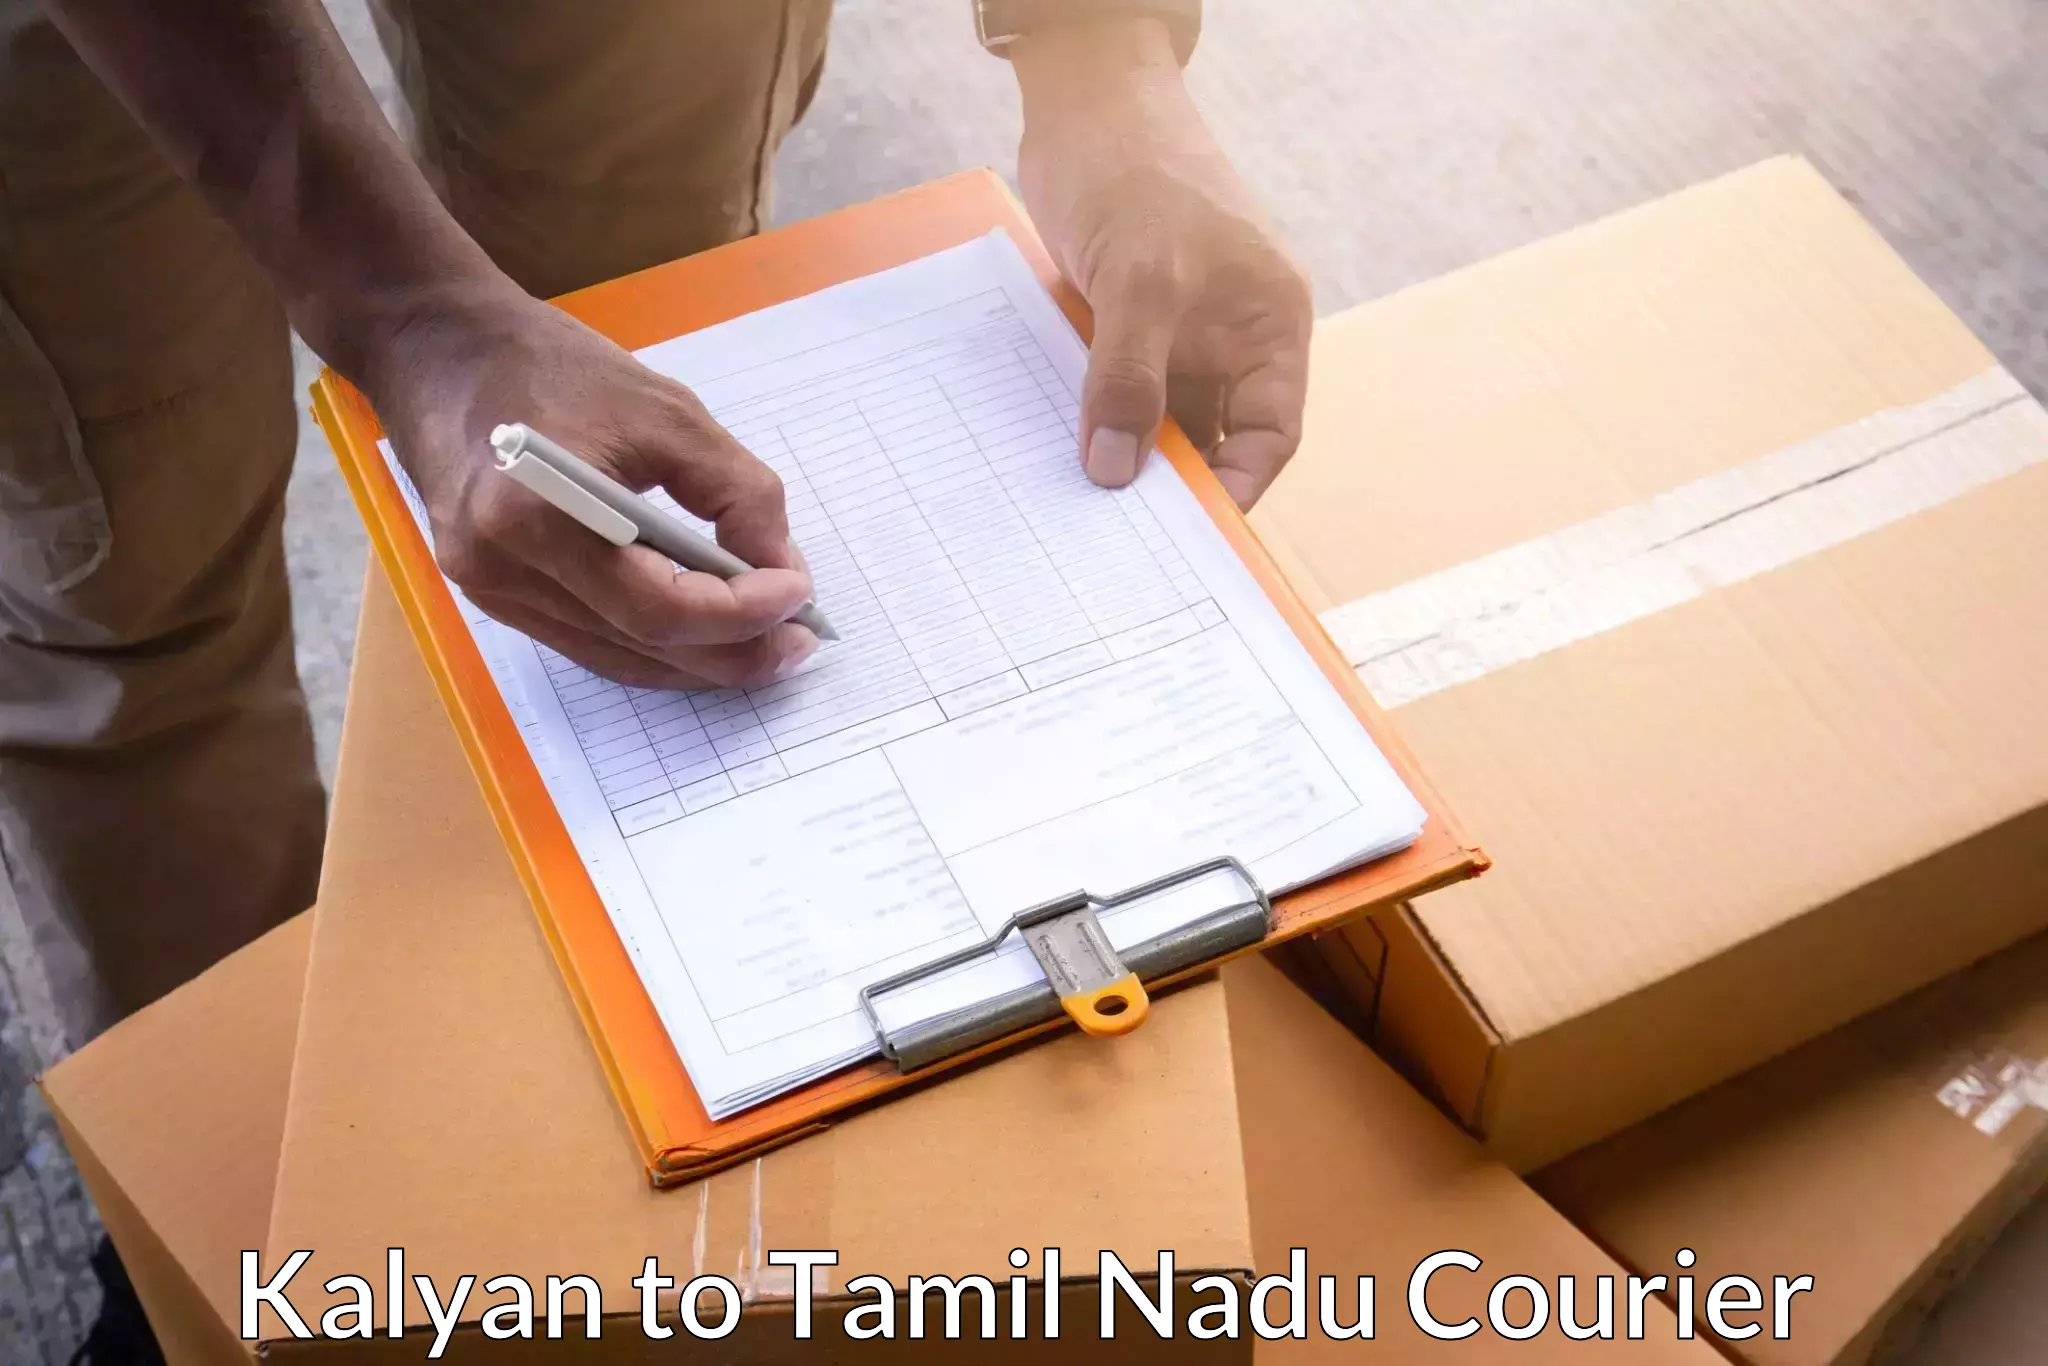 State-of-the-art courier technology Kalyan to Ennore Port Chennai